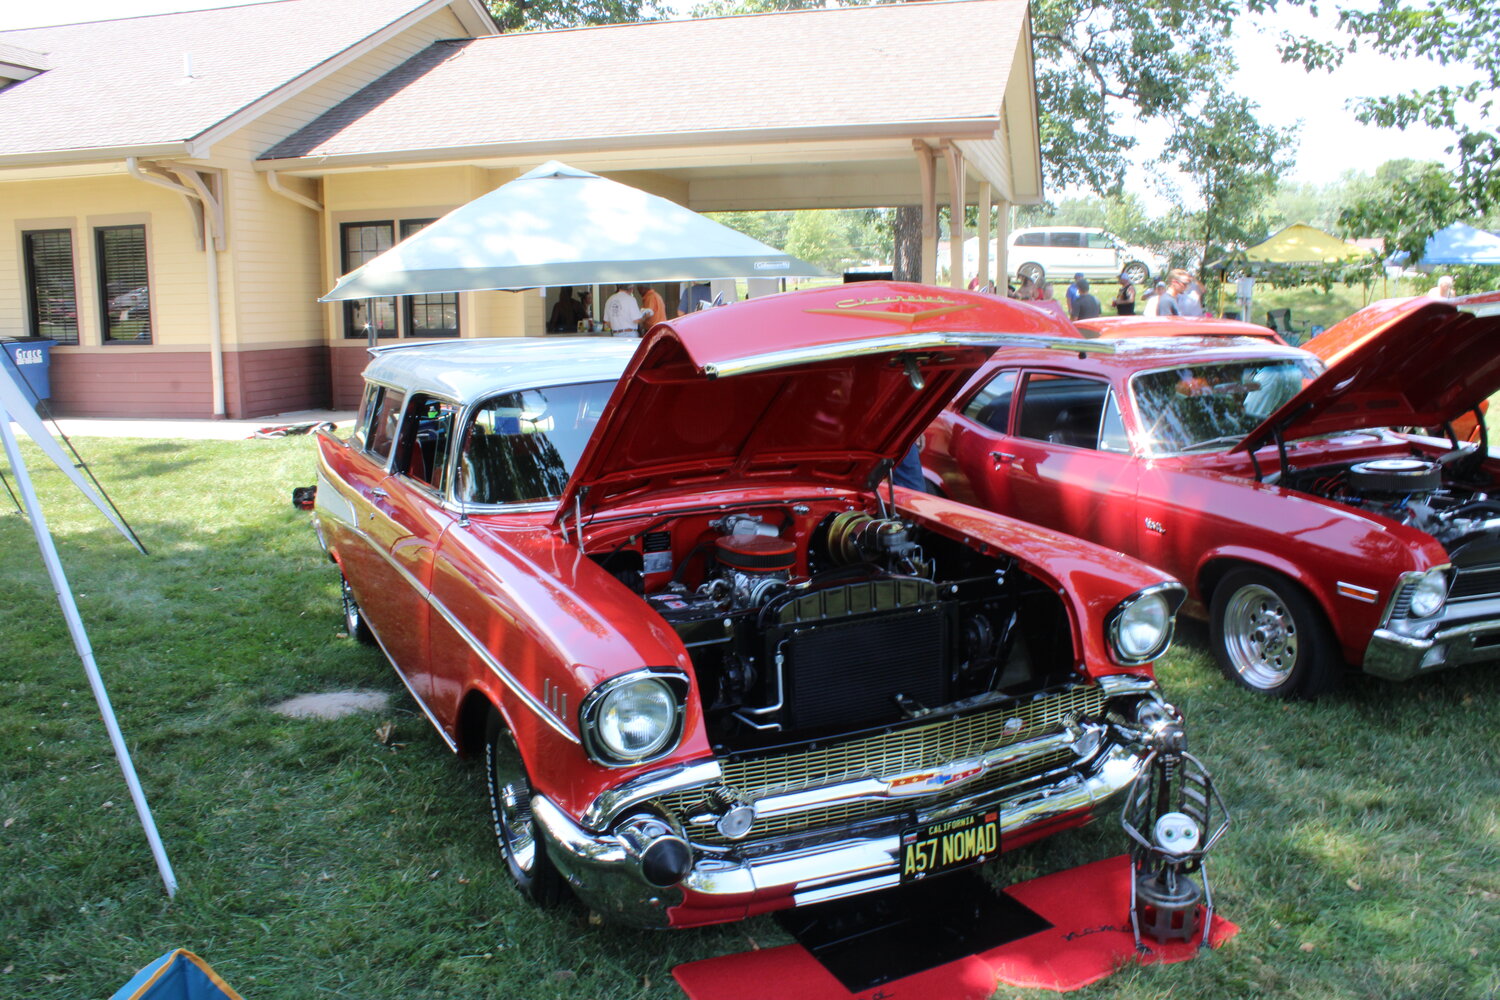 Ron Feldman's 1957 Chevy Nomad won best in show during the eighth annual Fat Heads Car Show.